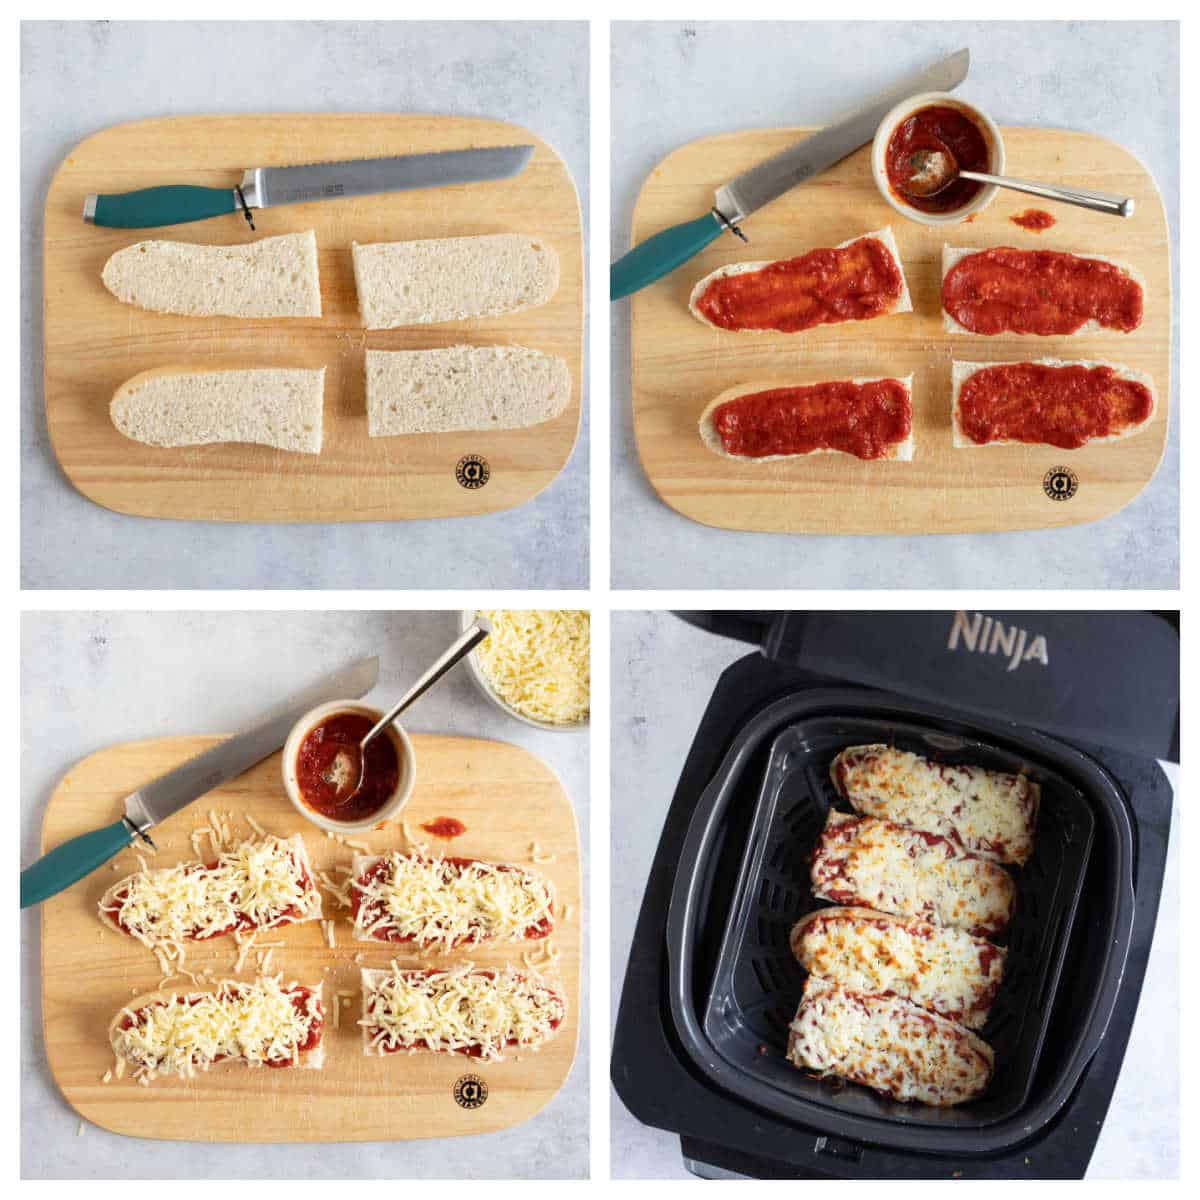 Step by step process photos for making French Bread pizza in an air fryer.